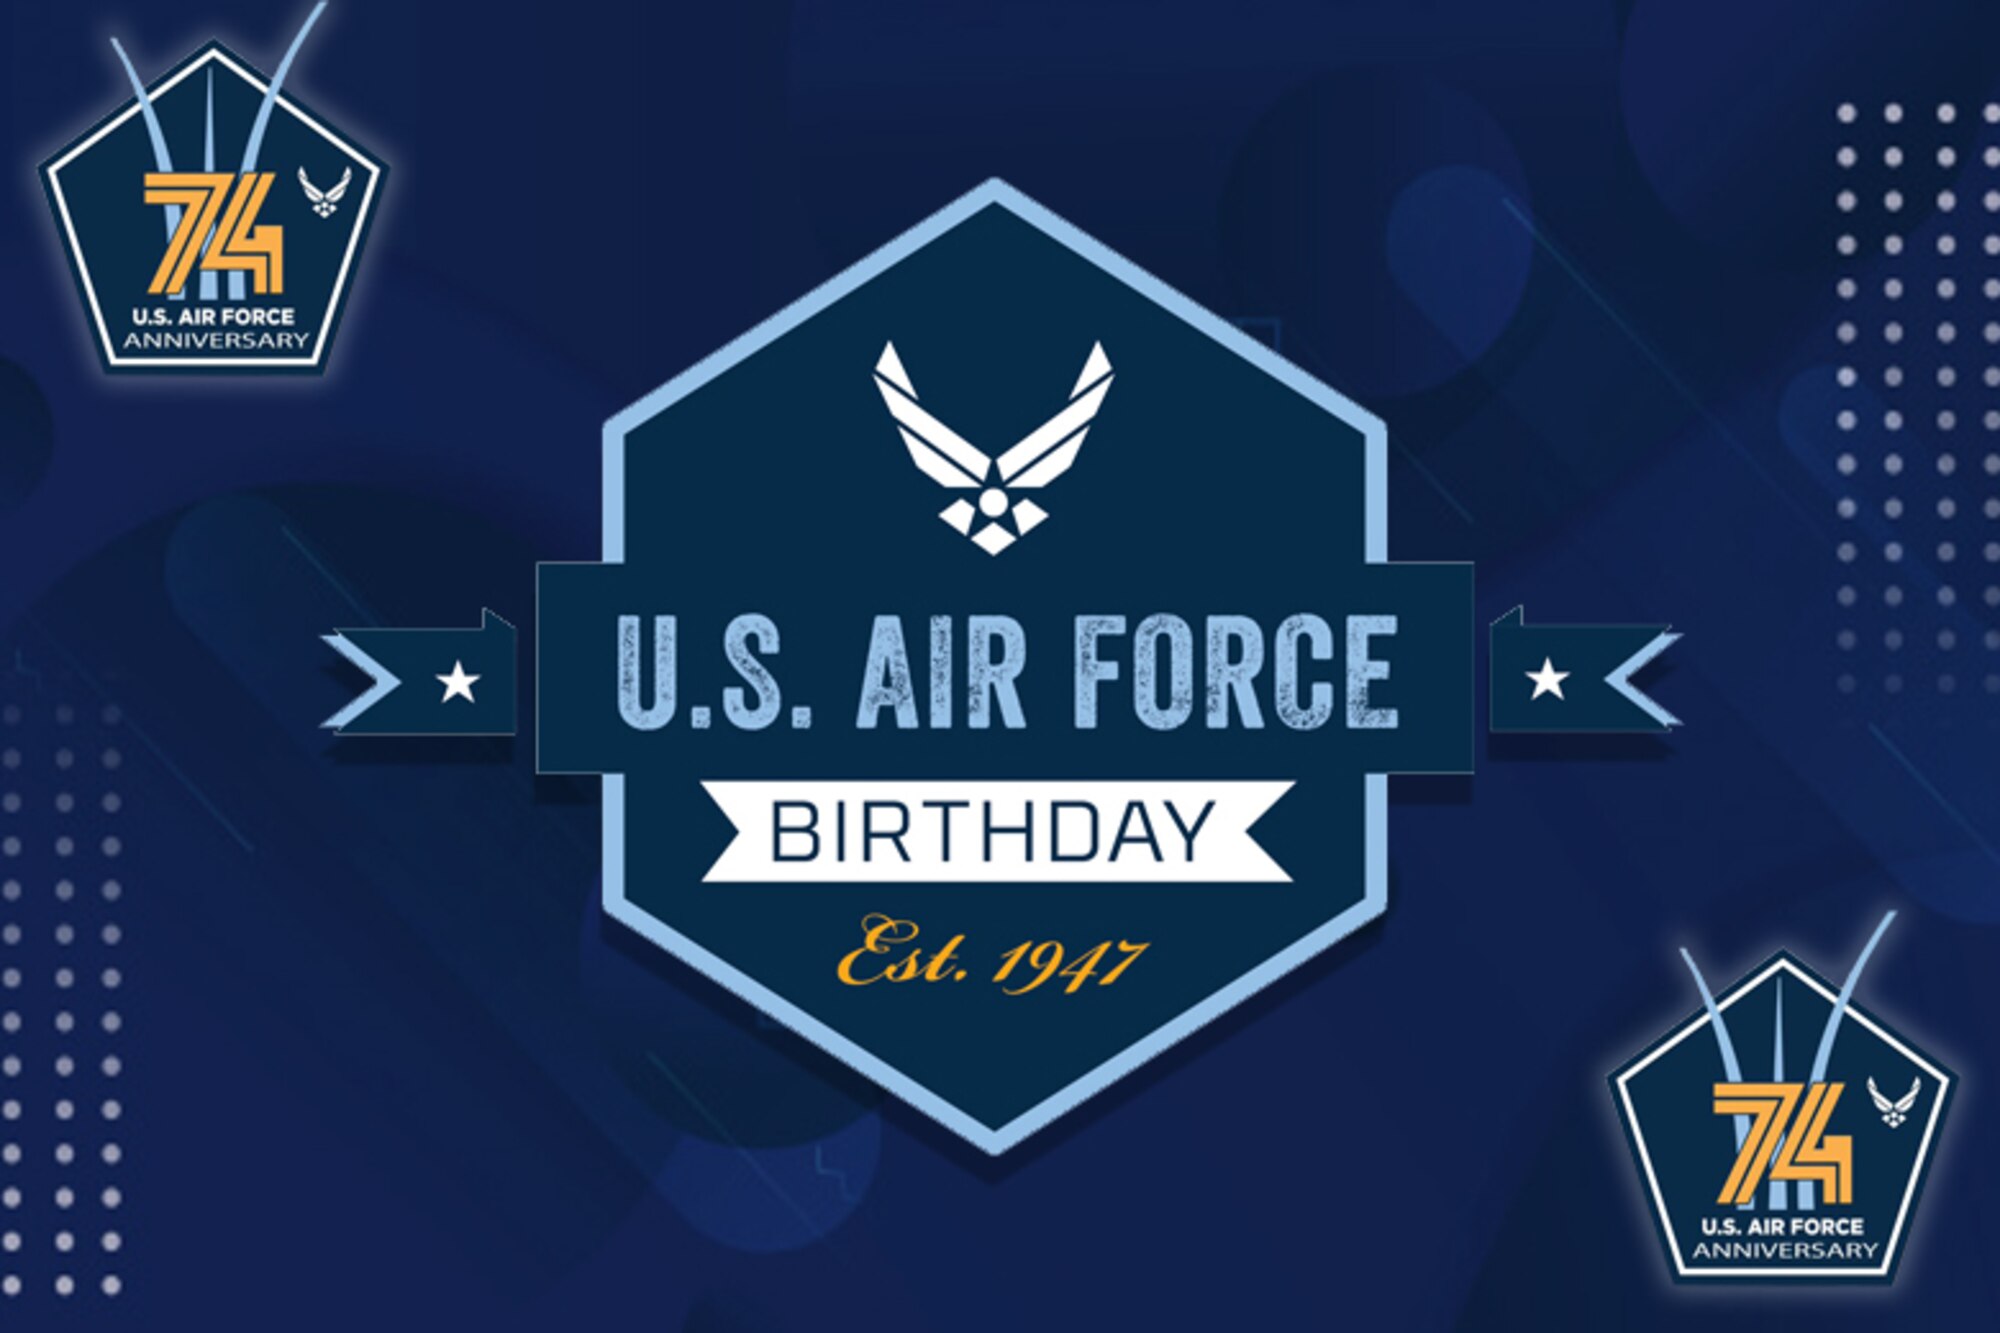 Air Force 74th Birthday graphic. (U.S. Air Force graphic by Jeremy Roman)